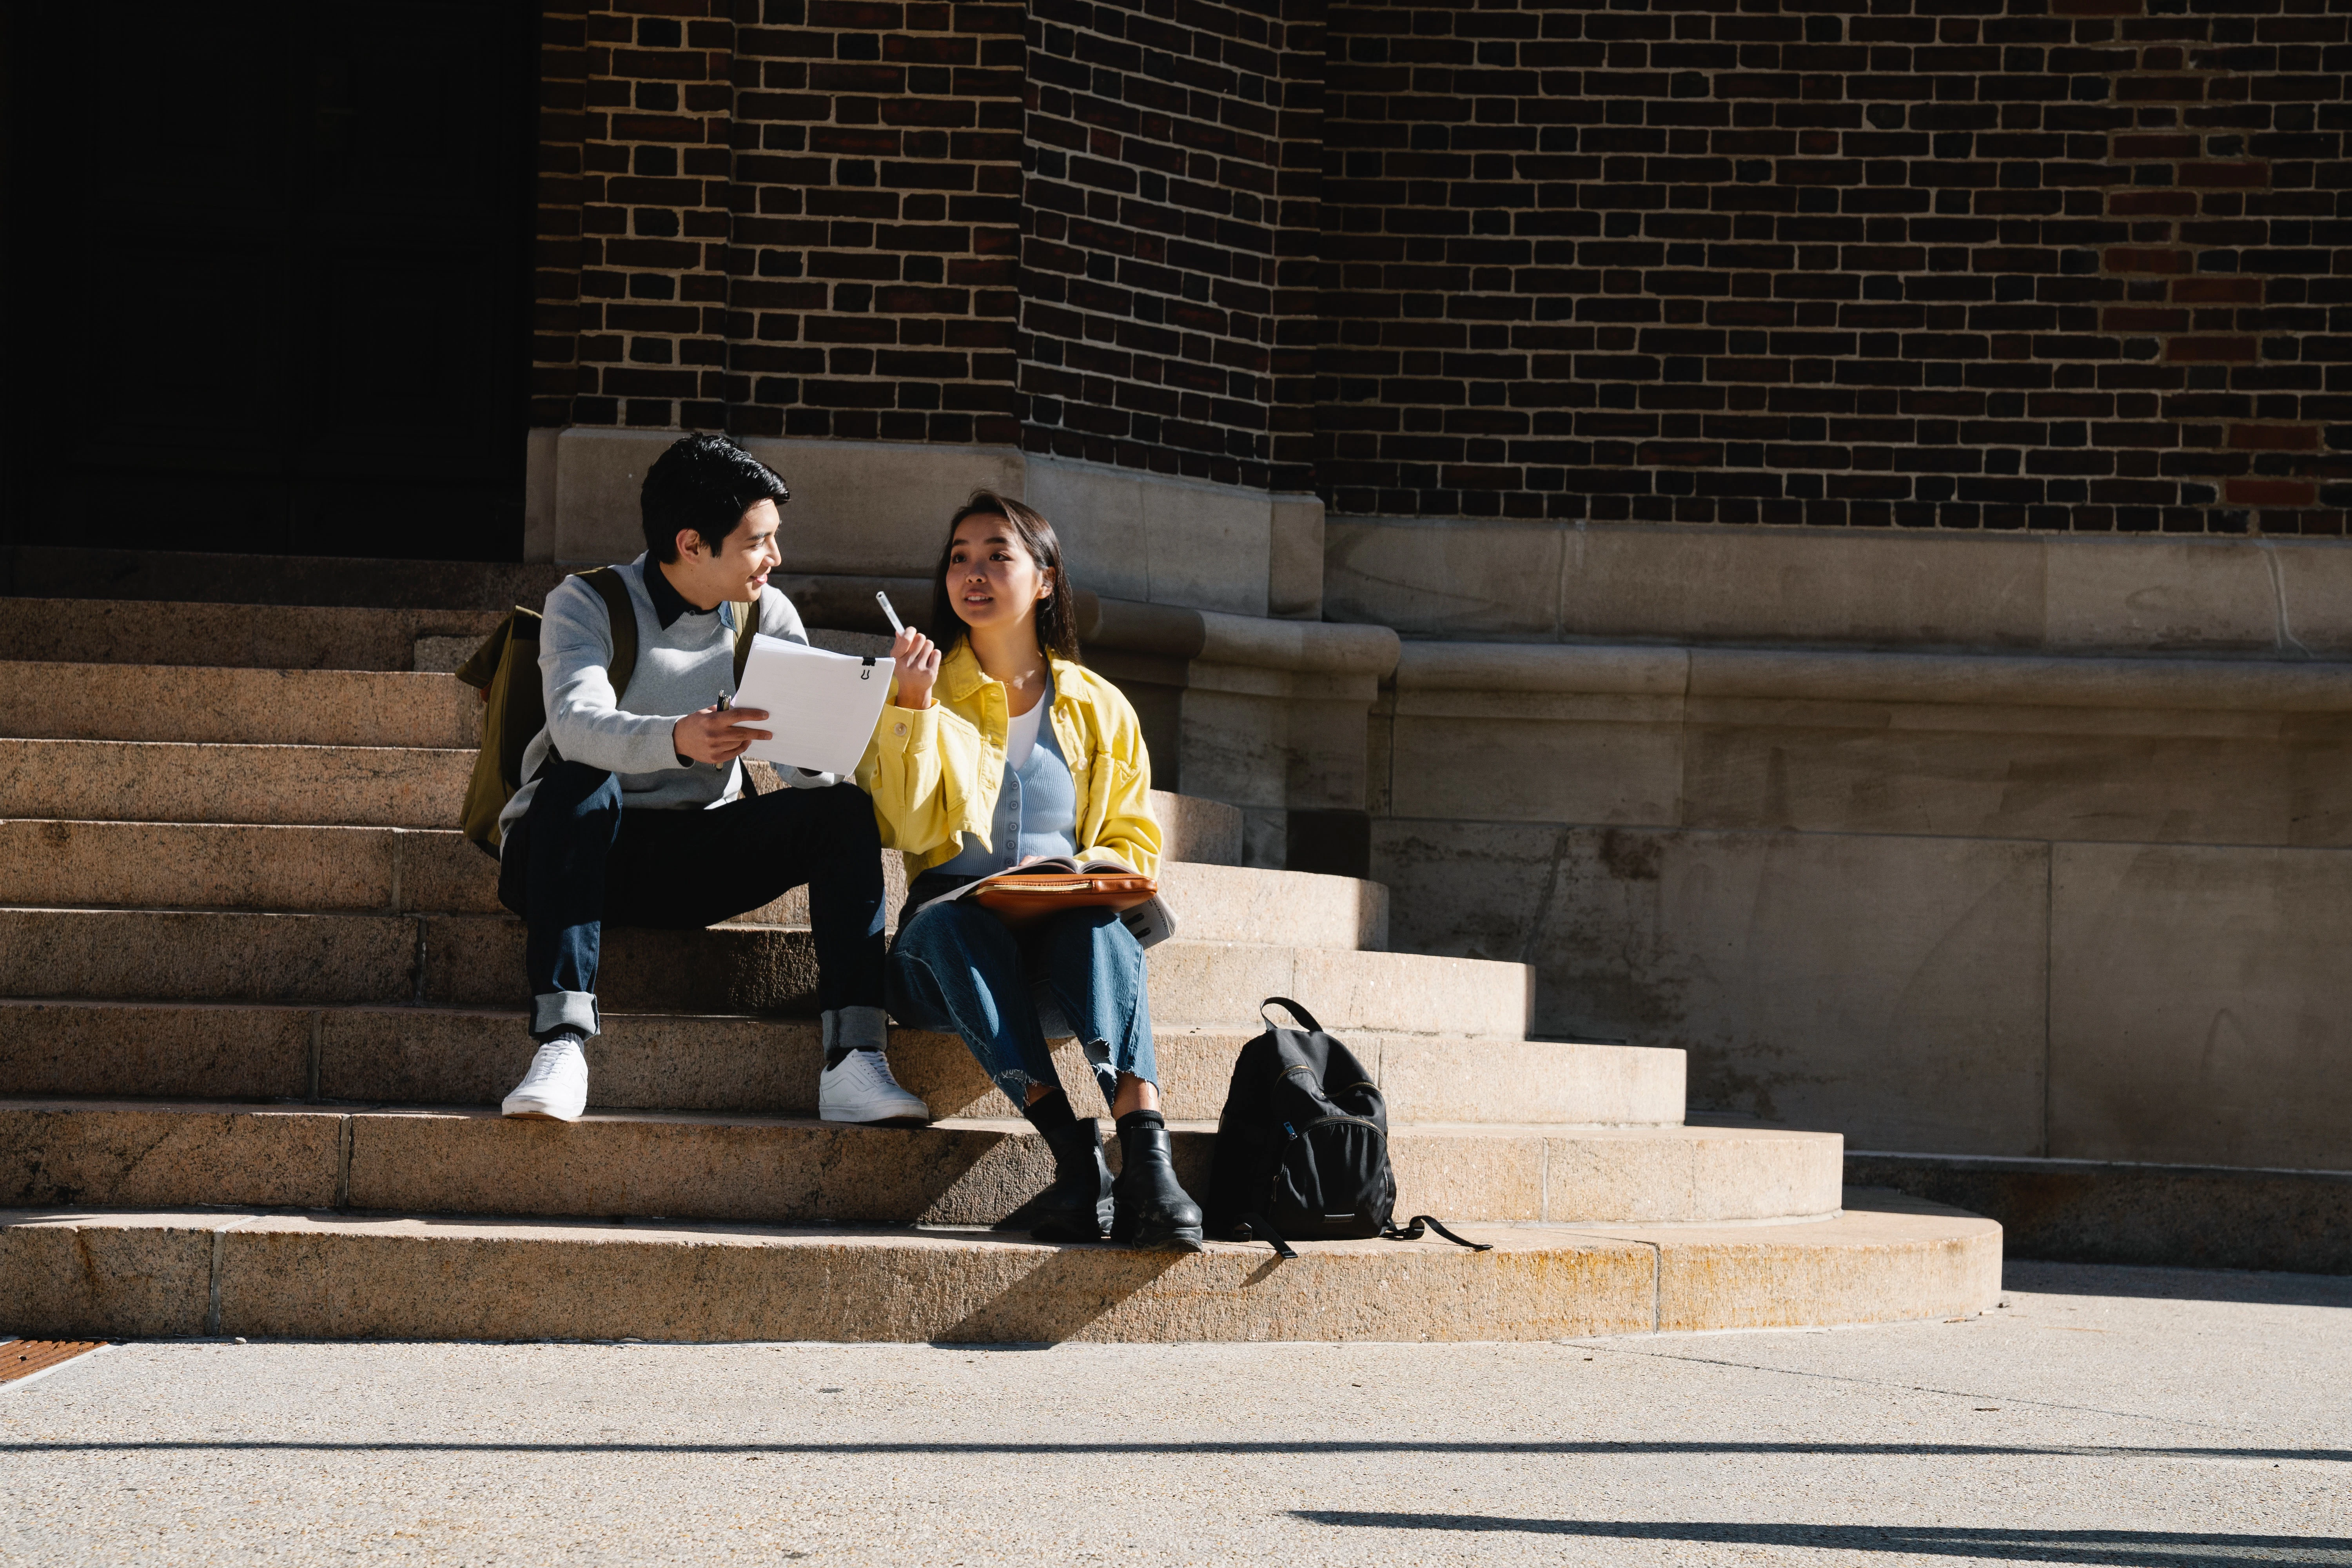 a photo of two students sitting on university steps, having an animated conversation